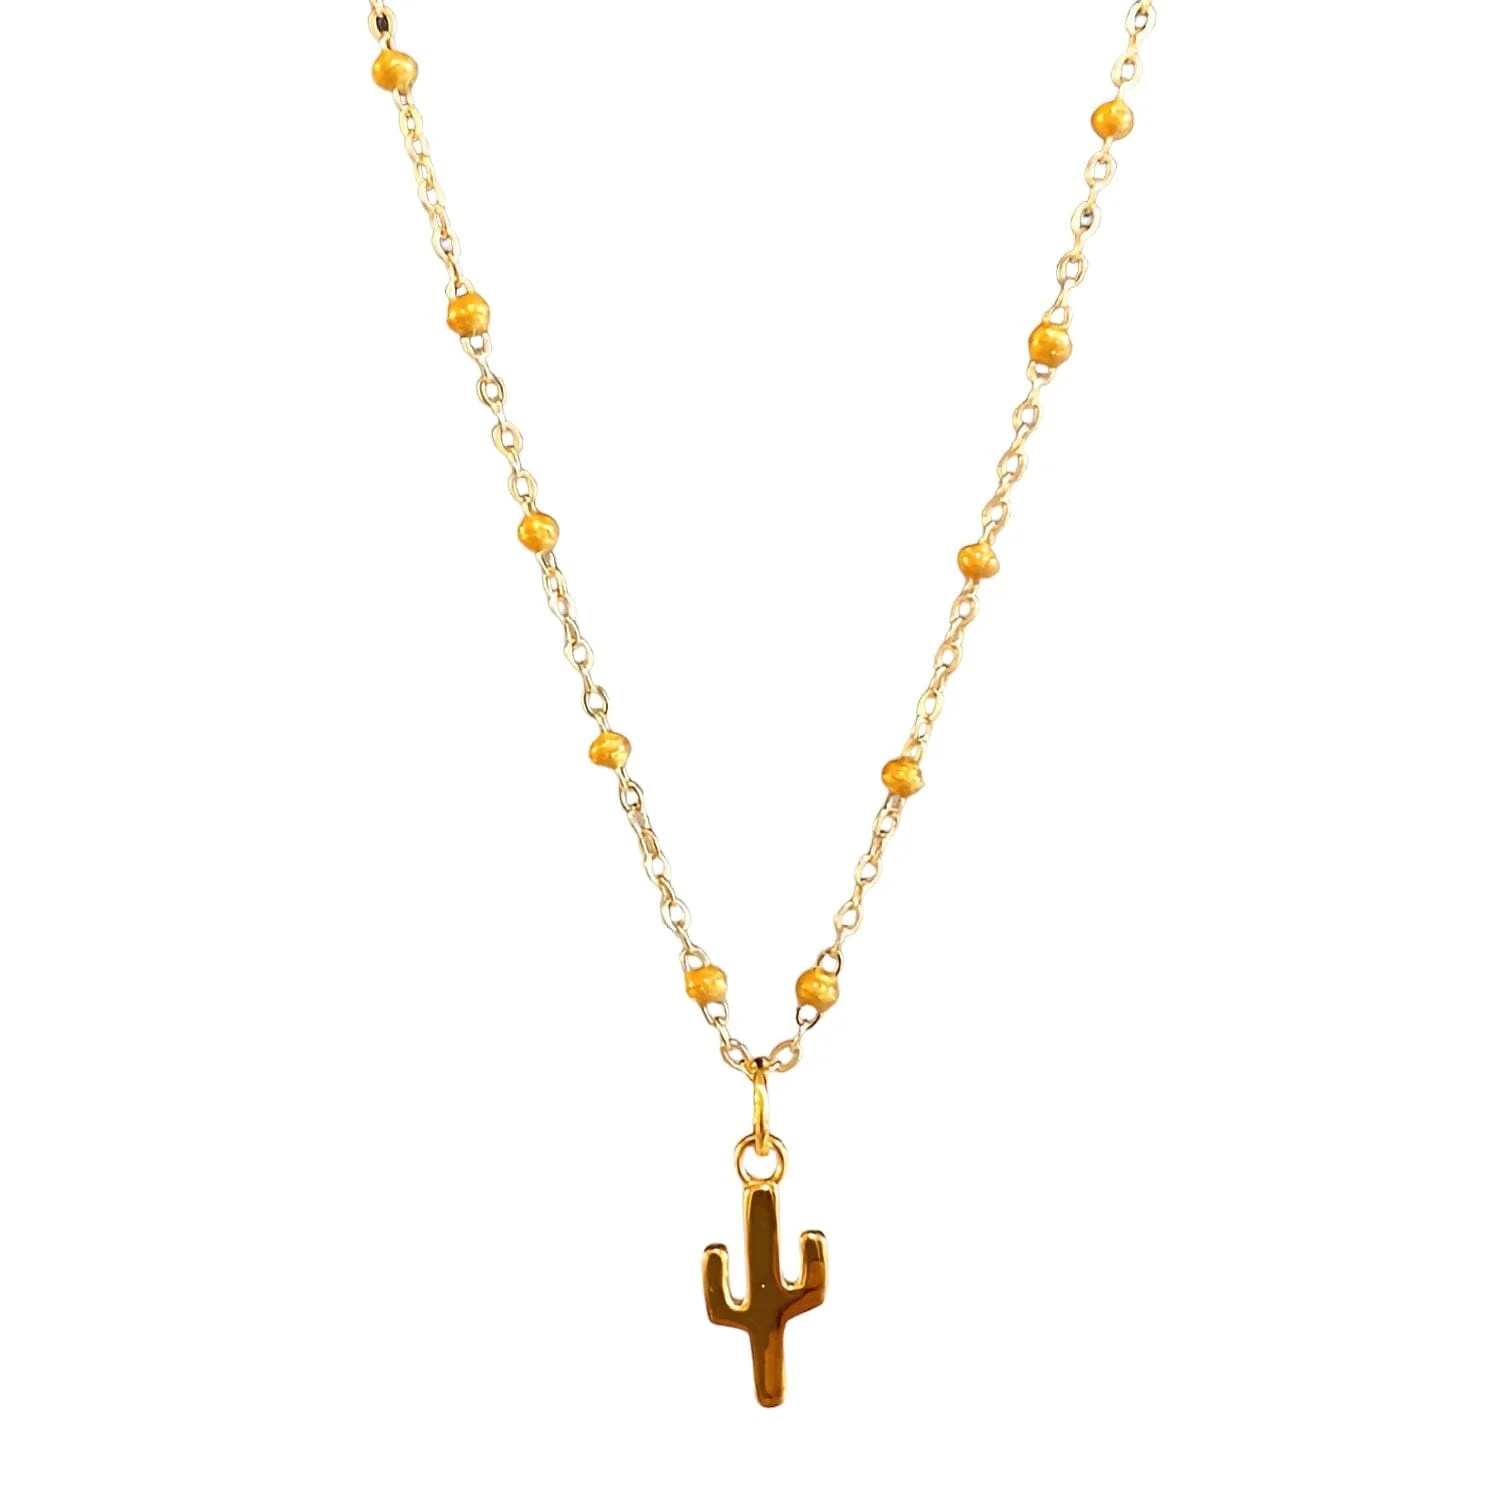 Reveal Elegance: The Allure of Gold Cactus Necklaces